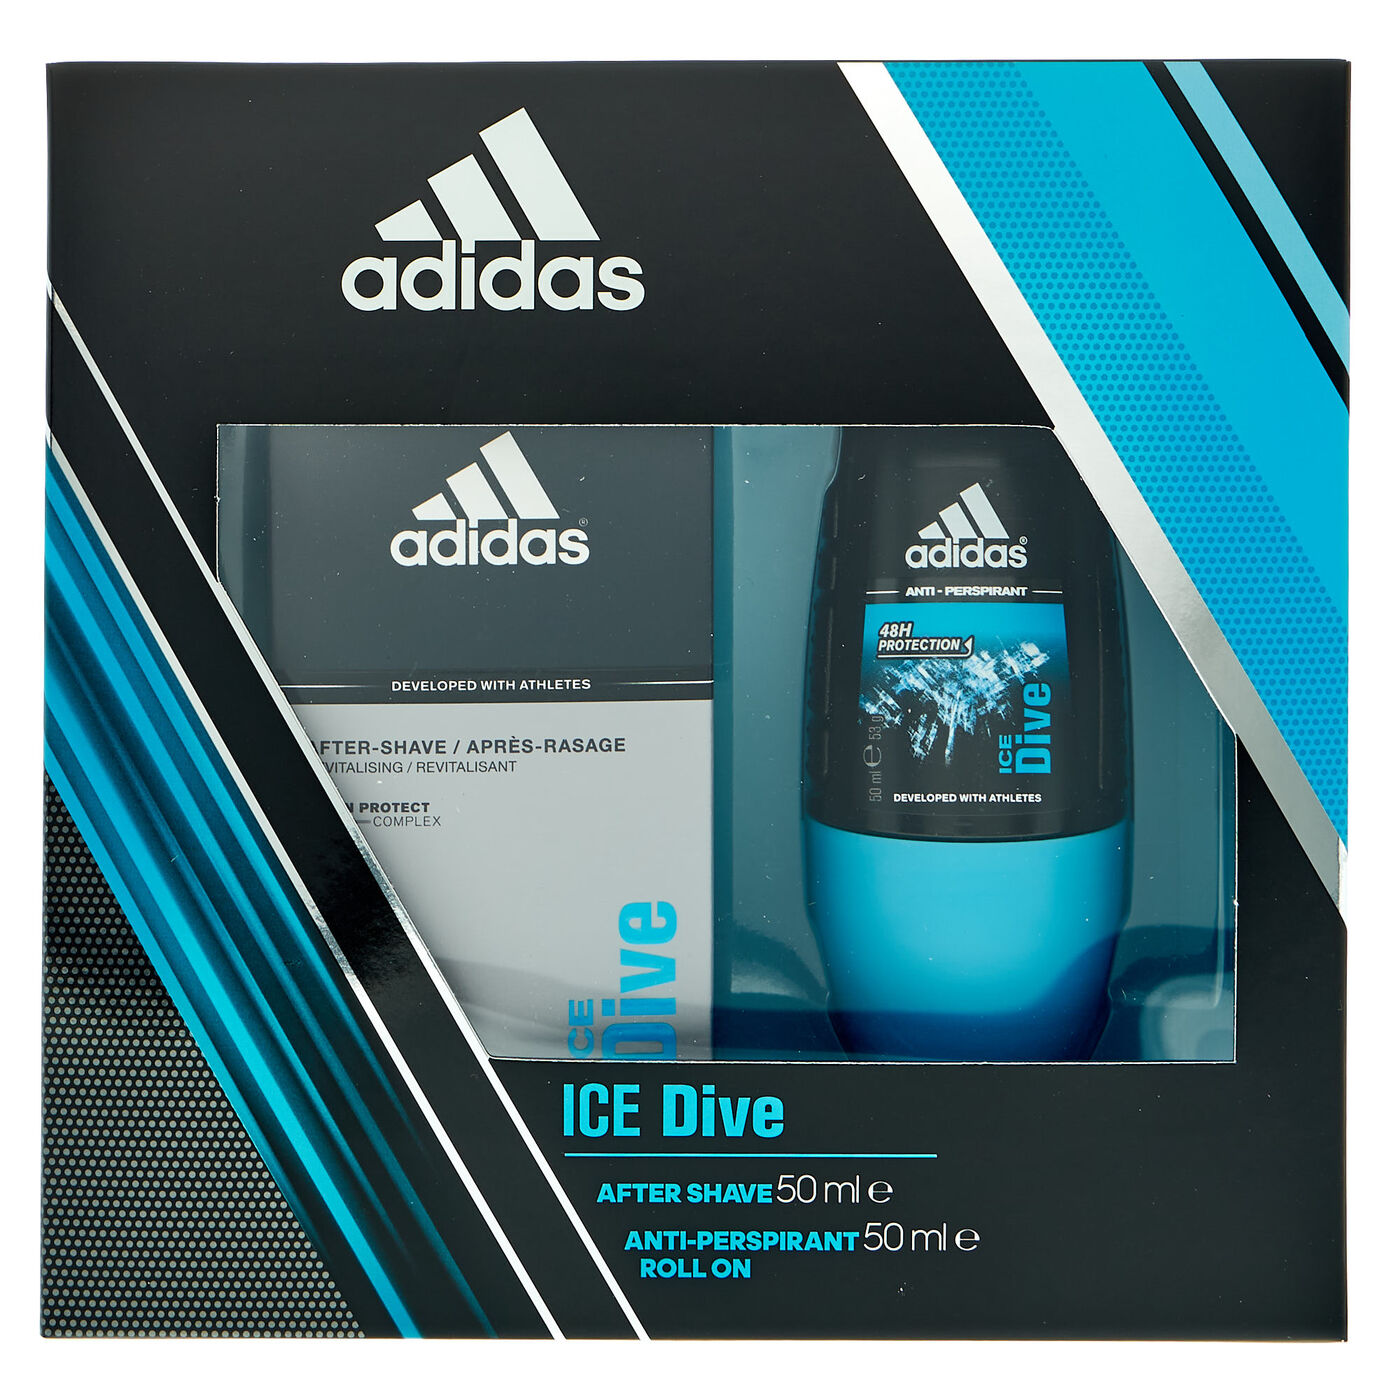 Eléctrico Mala suerte colisión Buy Adidas Ice Dive Aftershave & Deodorant Roll-On Gift Set for GBP 6.99 |  Card Factory UK